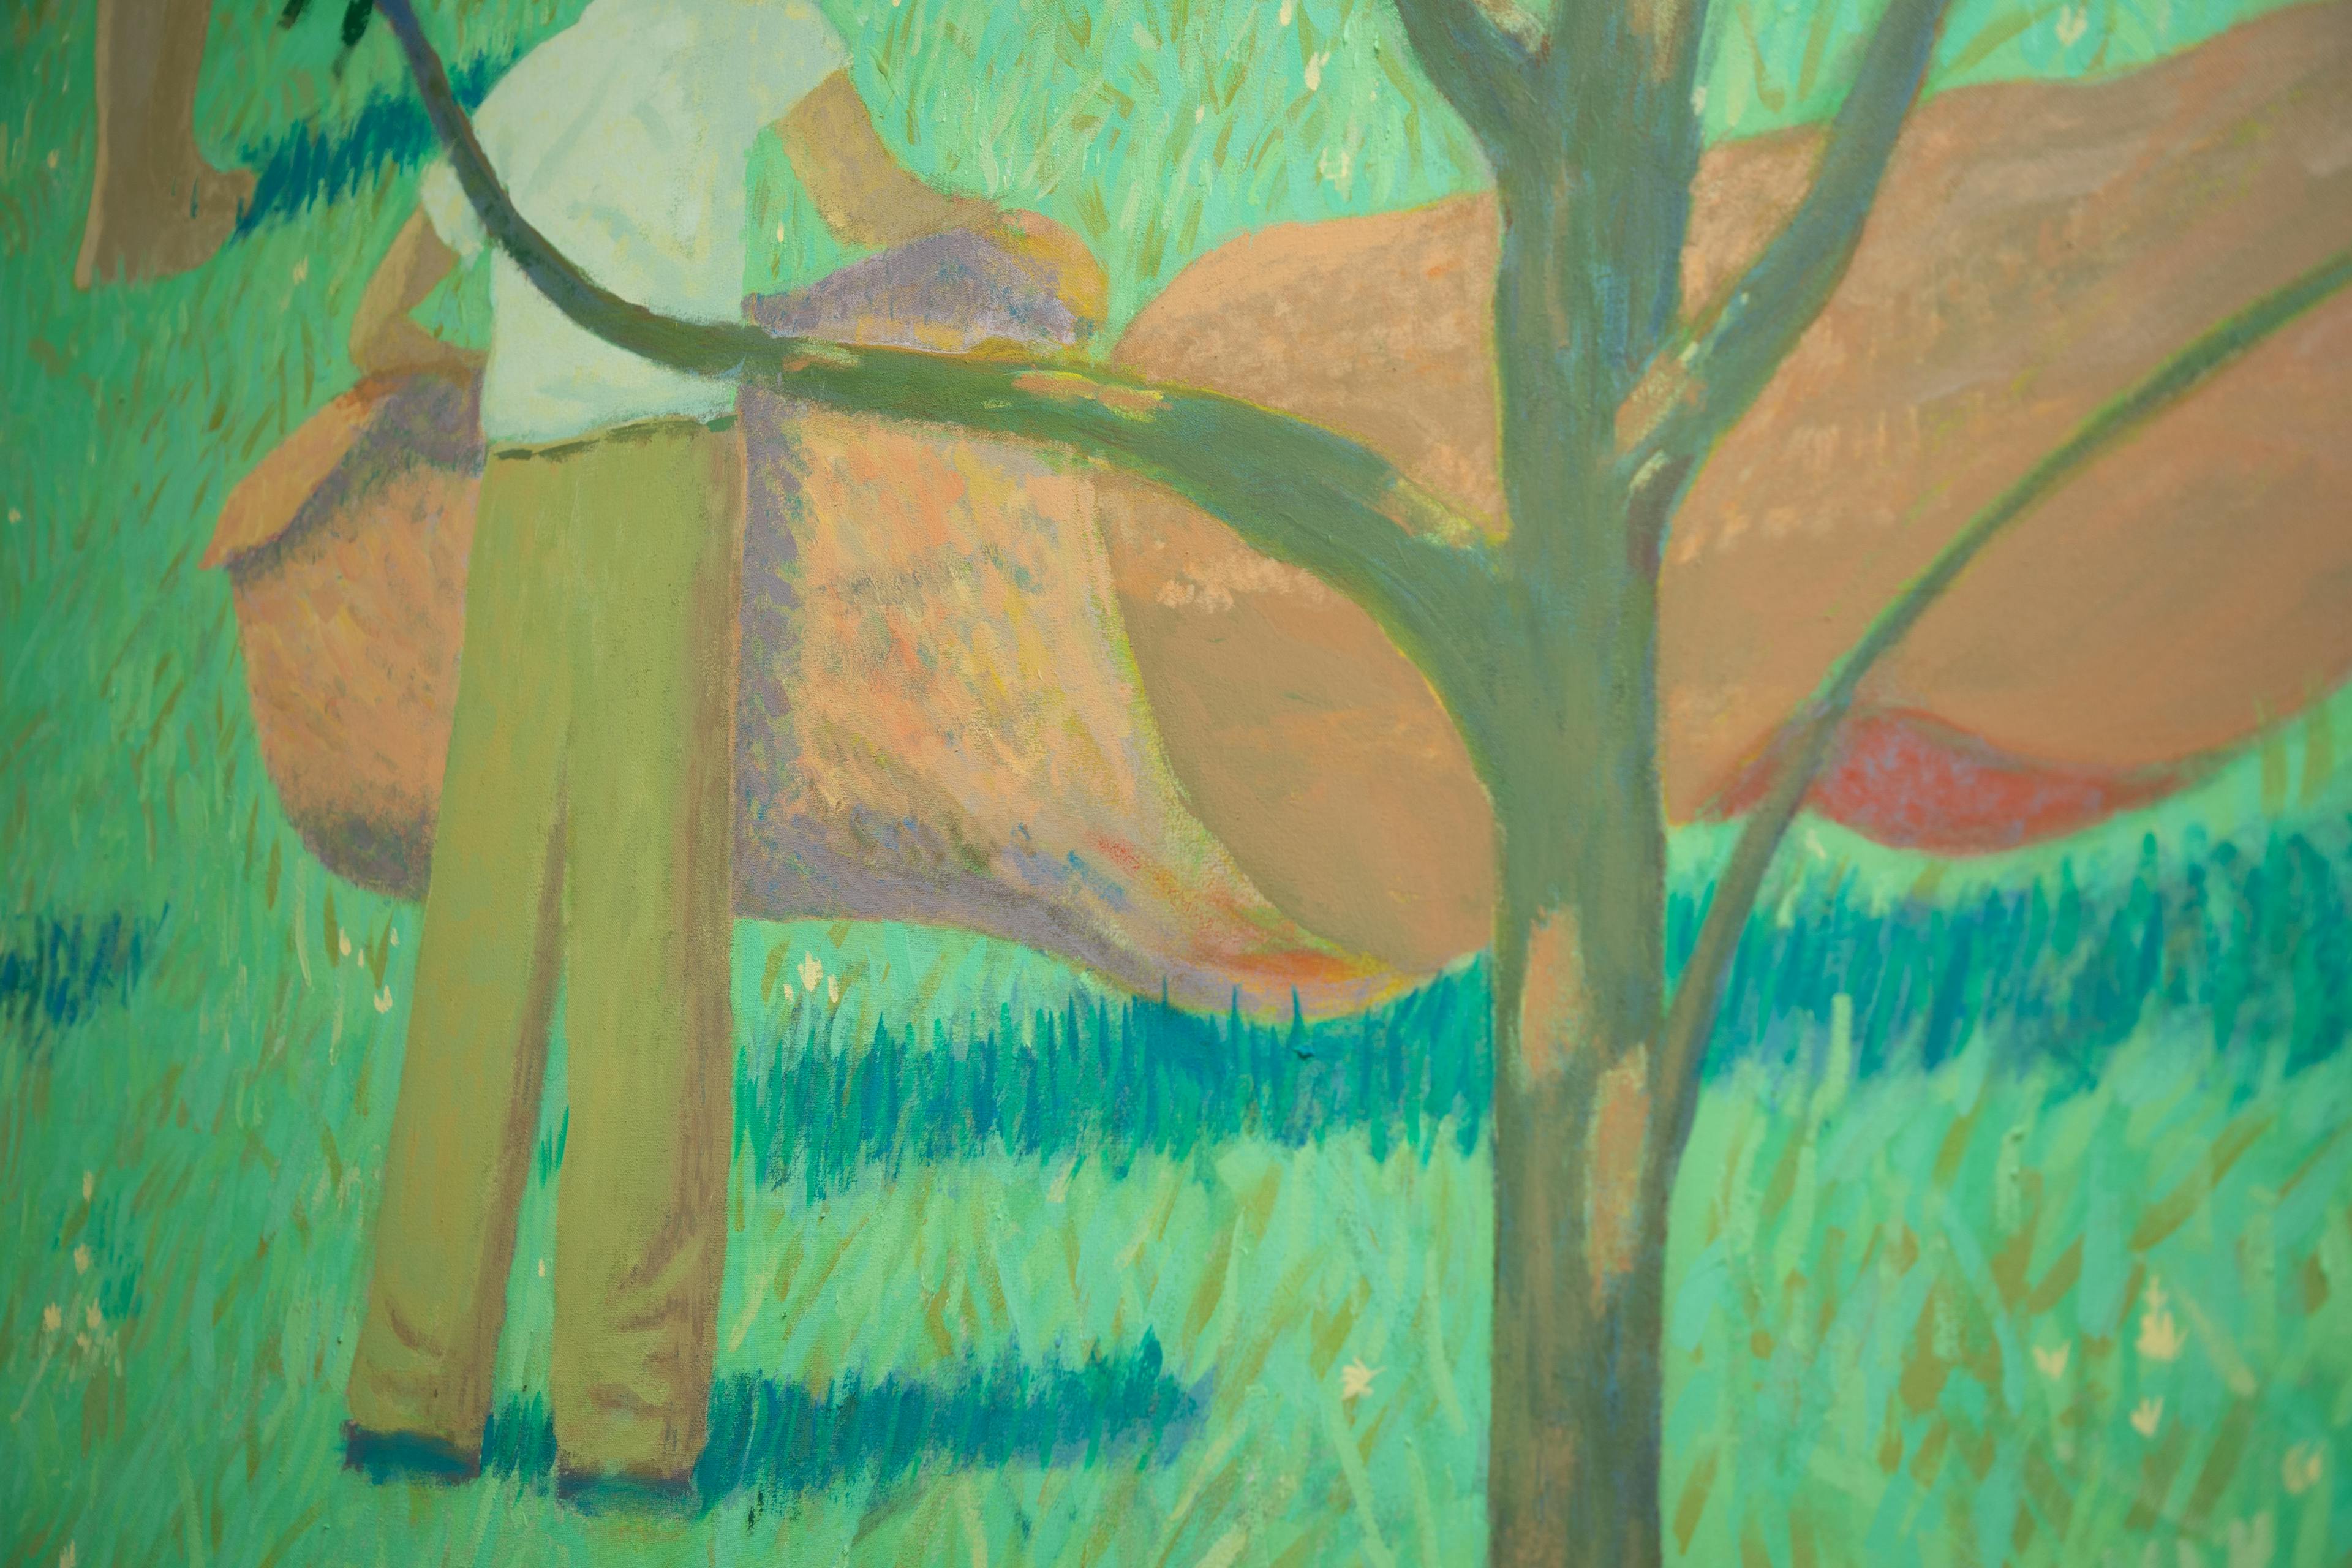 A close-up of painting by artist Jackson Joyce with a figure laying out an orange picnic blanket in a grassy field.